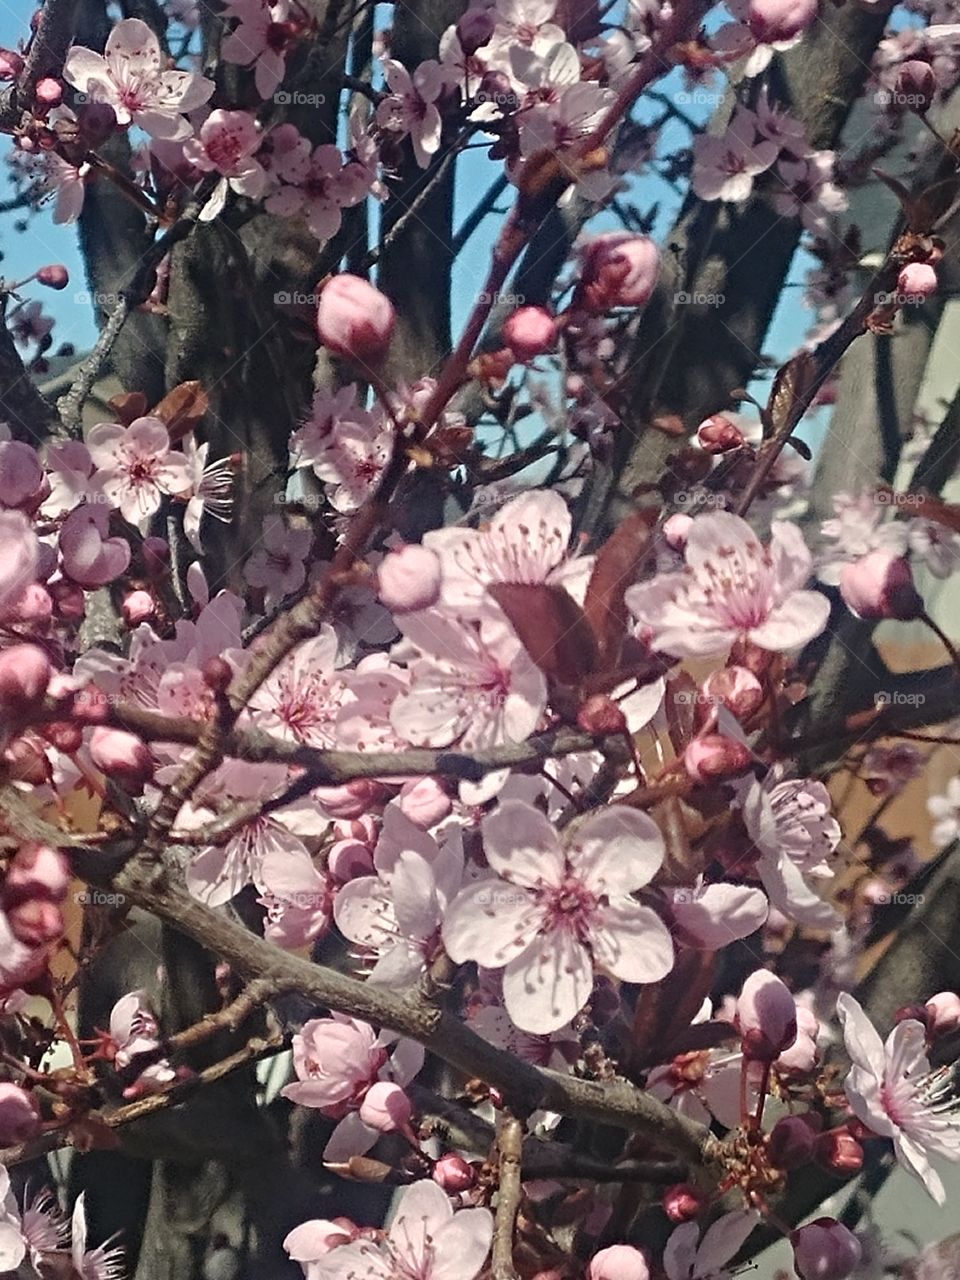 look at all the pretty Blossom and buds absolutely love cherry trees blossoms! They they're so delicate, they're pink, they're beautiful